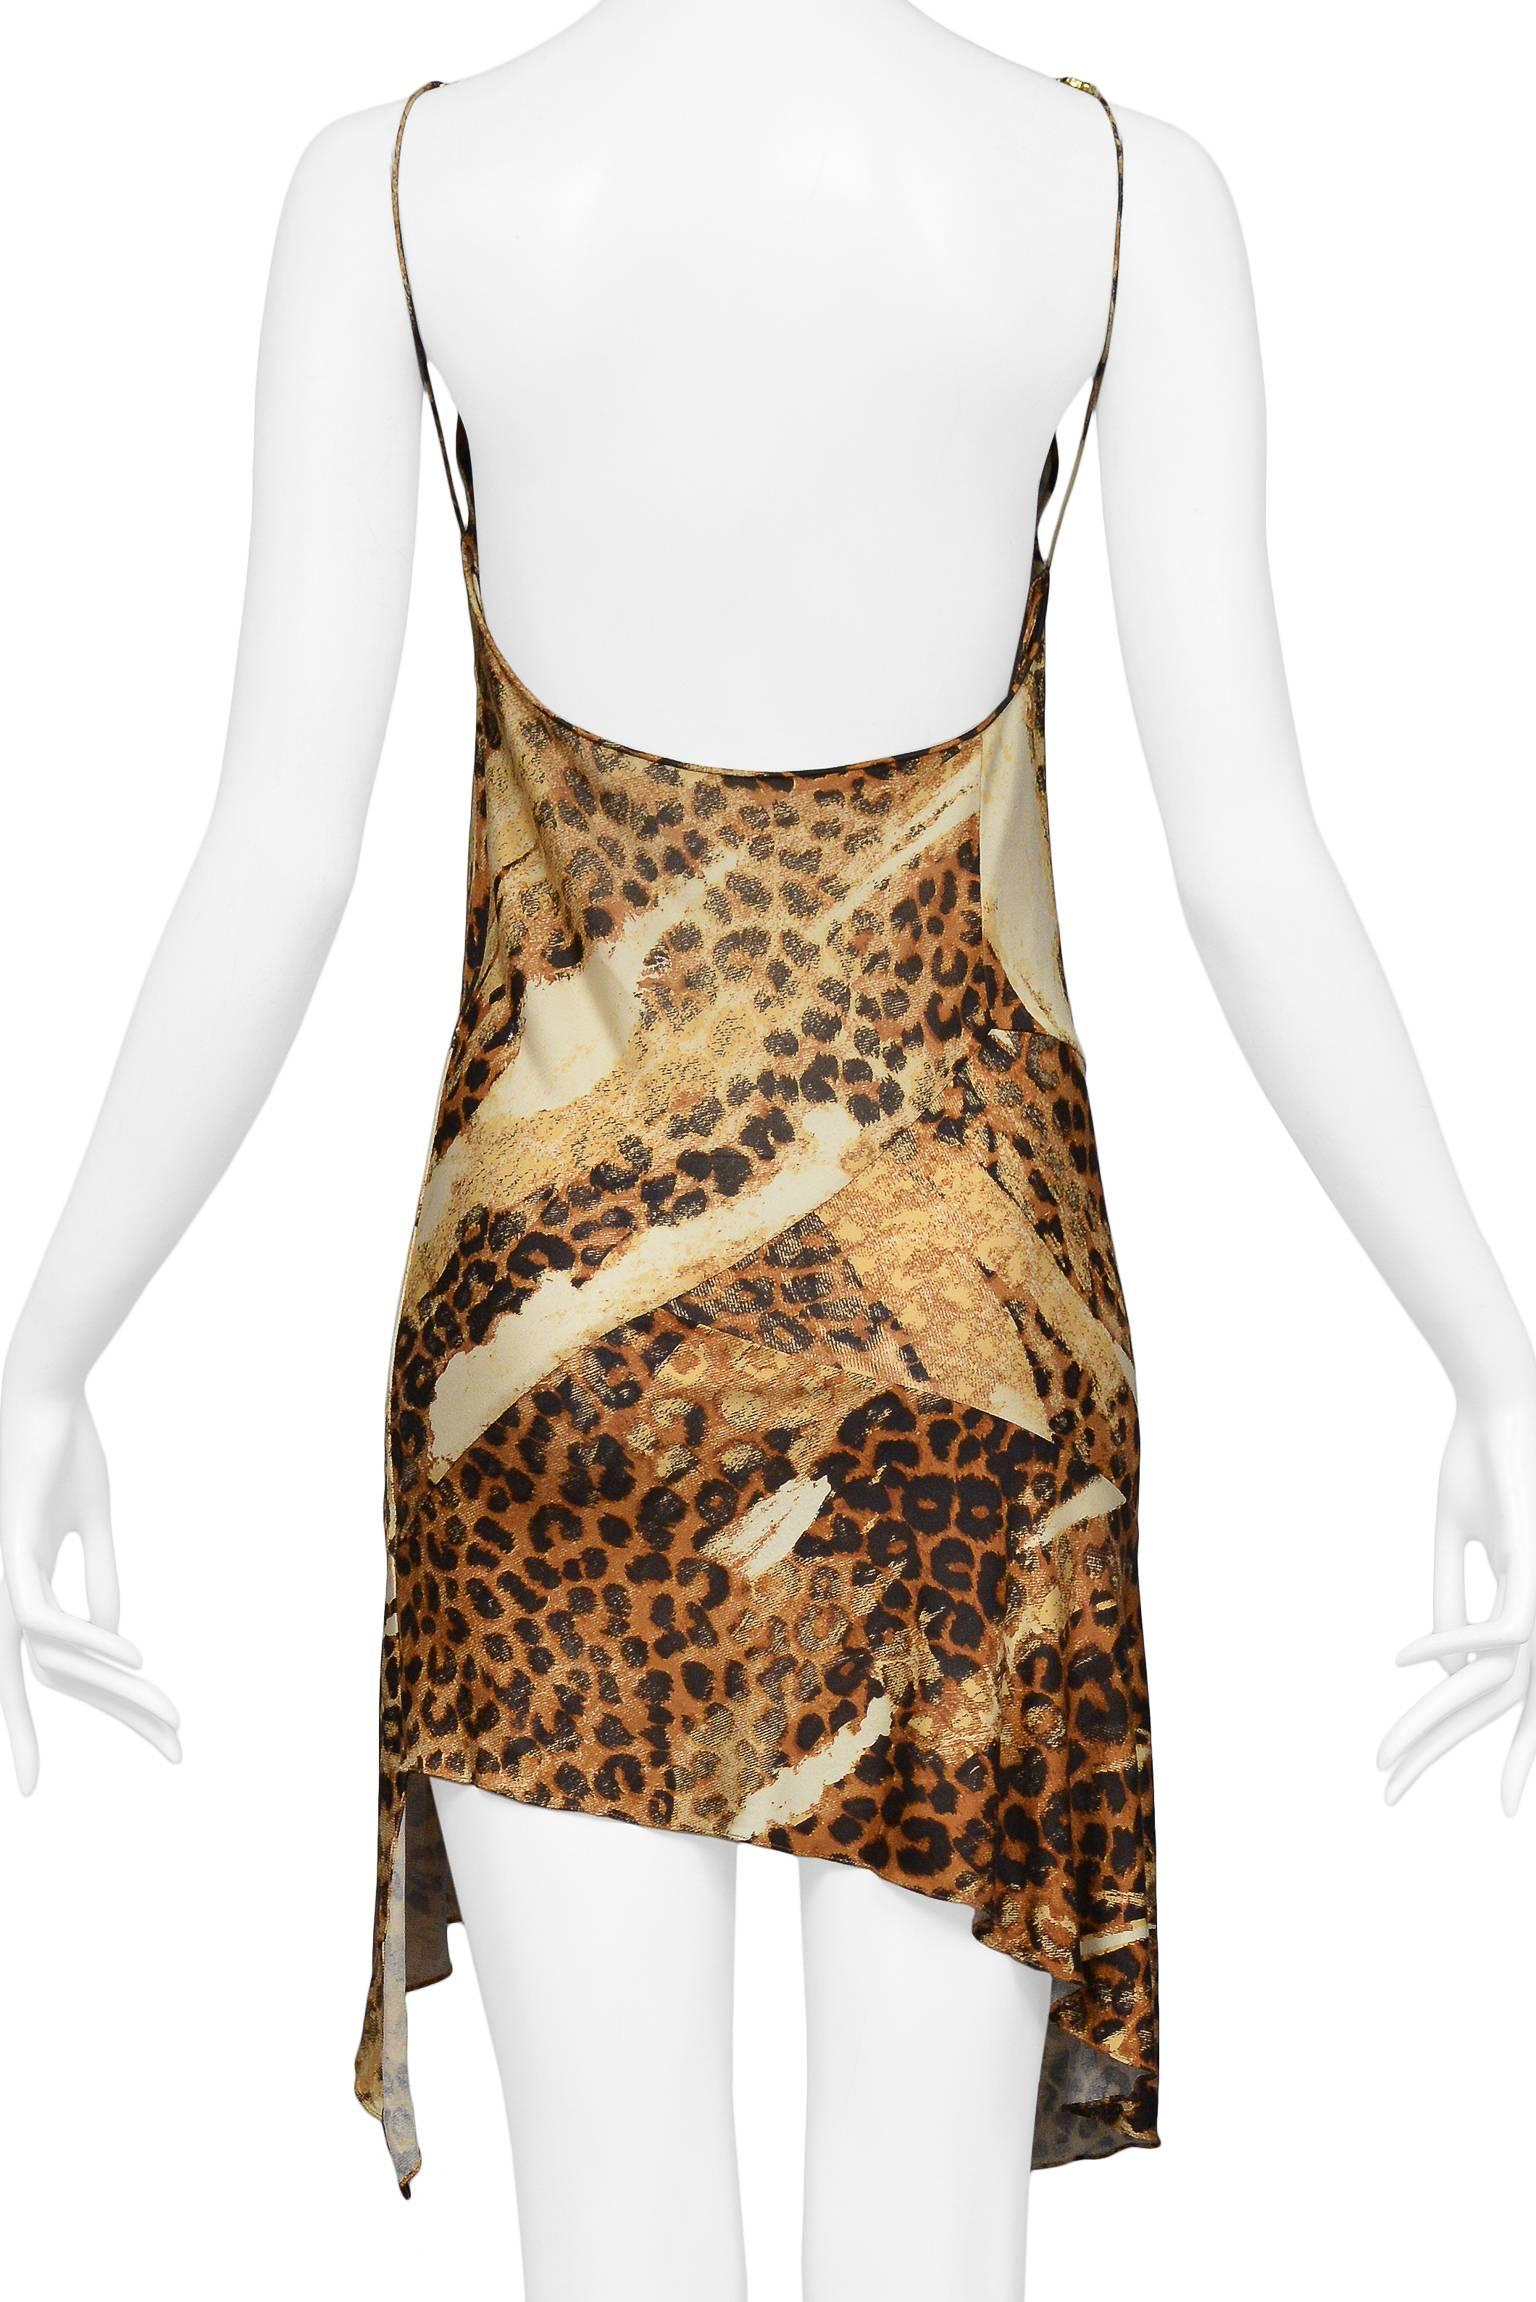 Dior by John Galliano Leopard Burnout CD Charm Disco Dress 2000 In Excellent Condition In Los Angeles, CA